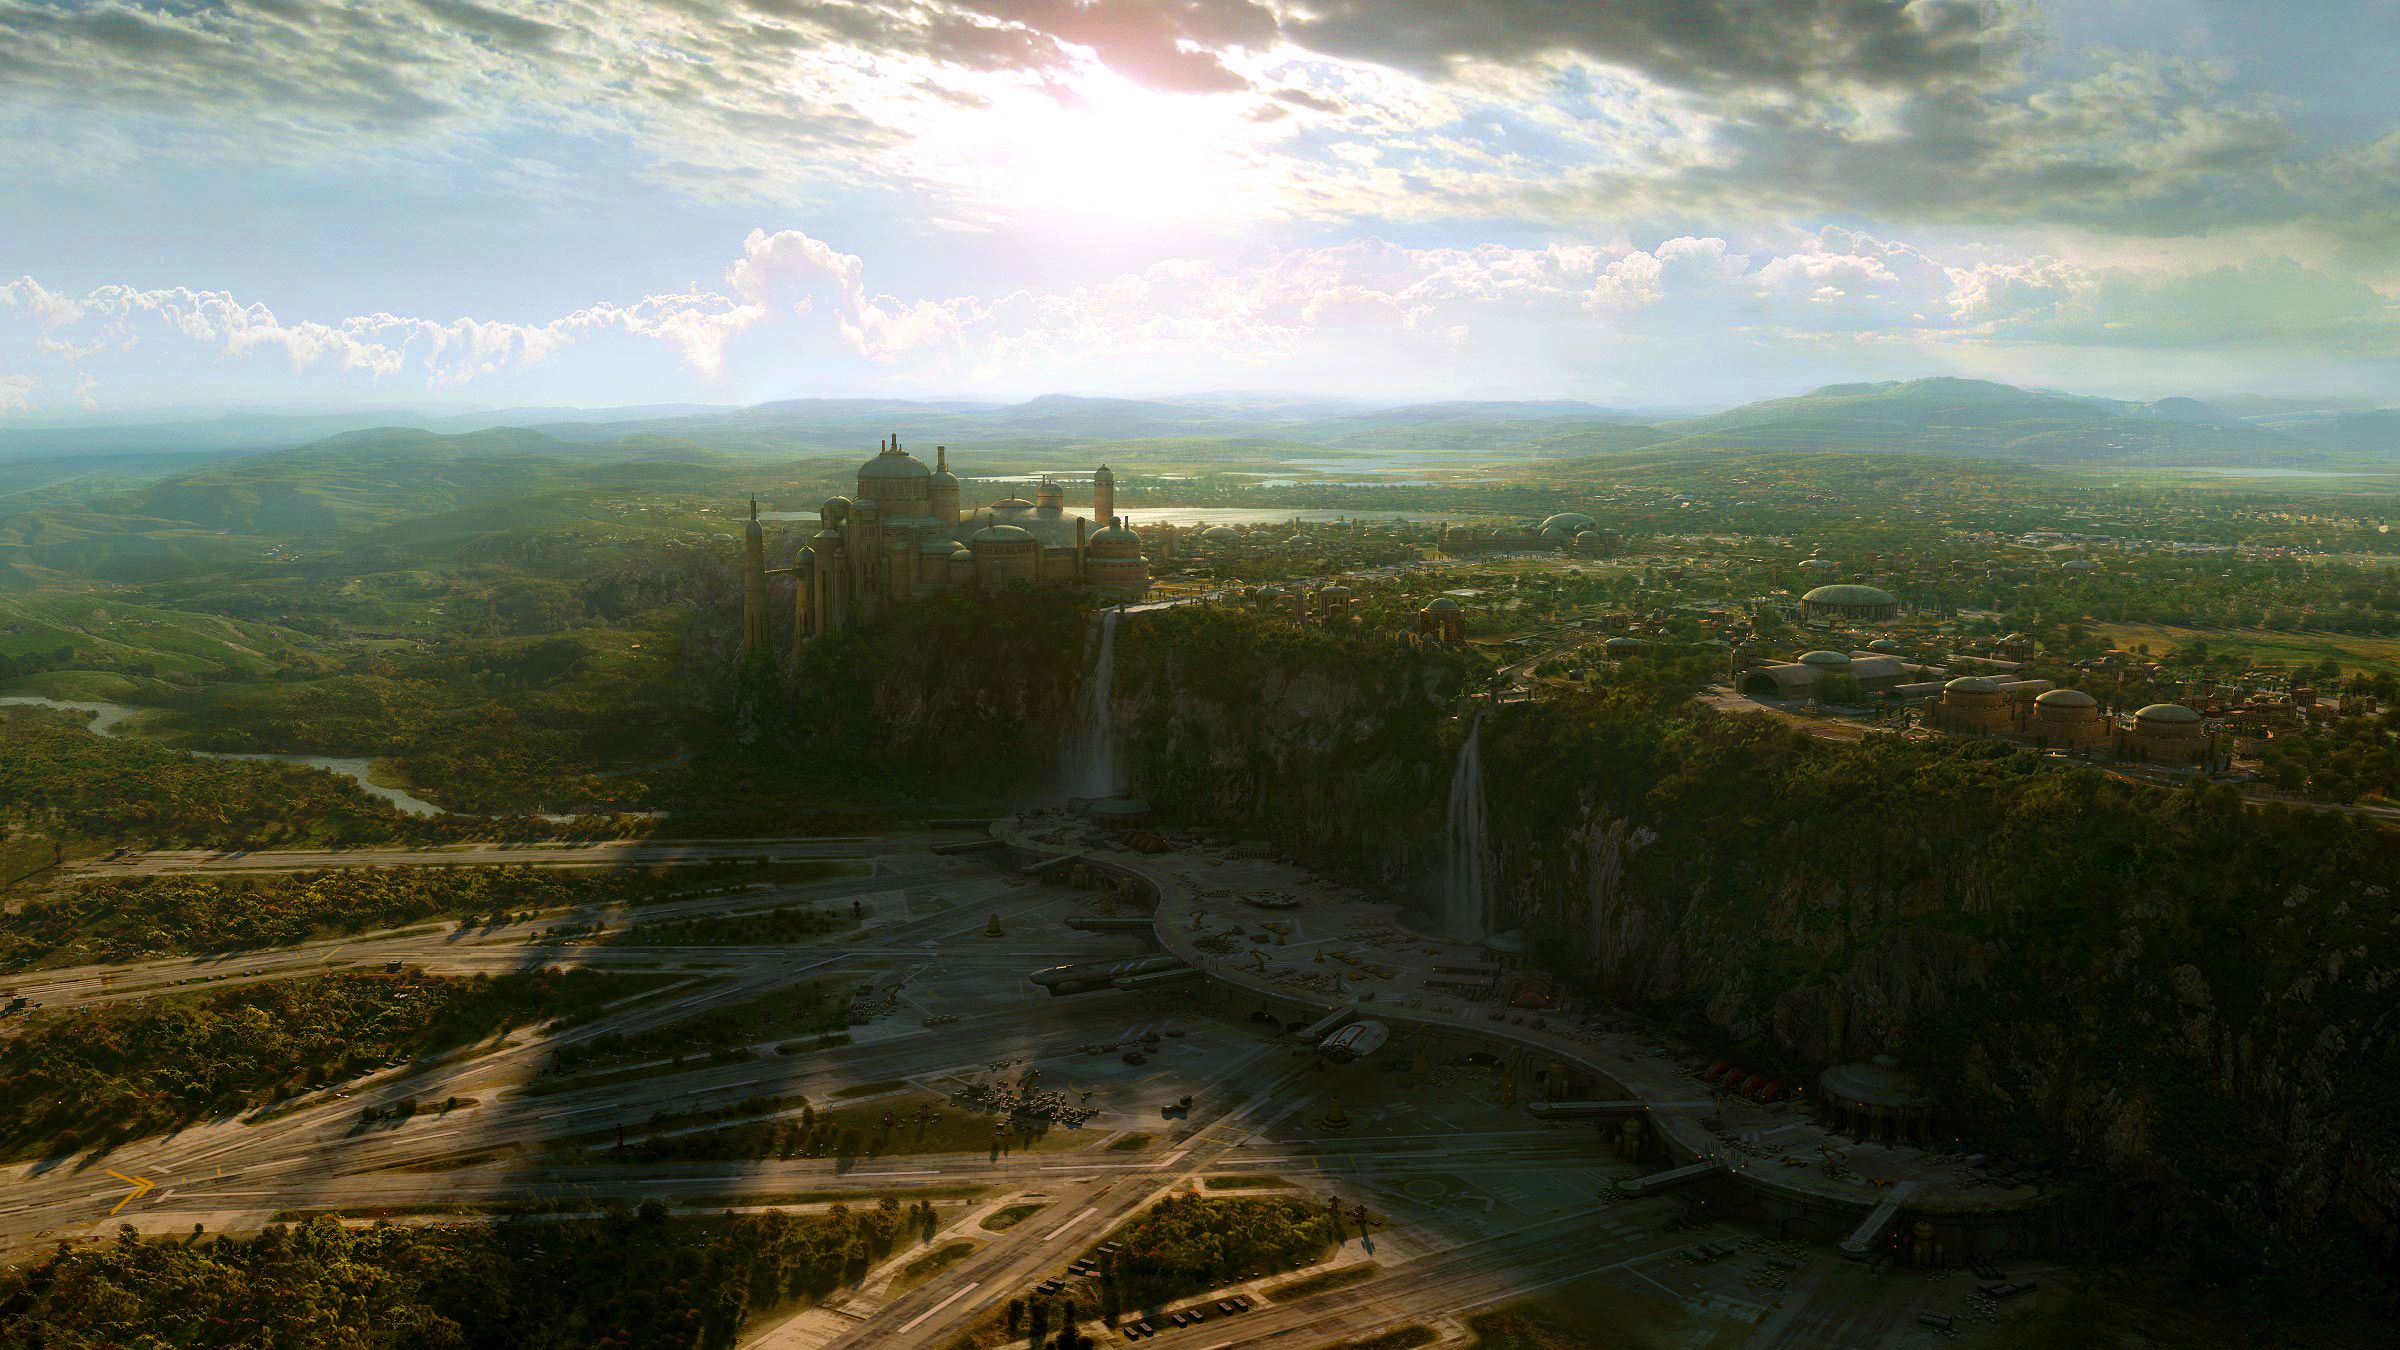 Naboo Wallpaper. Naboo Wallpaper, Attack of the Clones Naboo Wallpaper and Naboo Villa Wallpaper